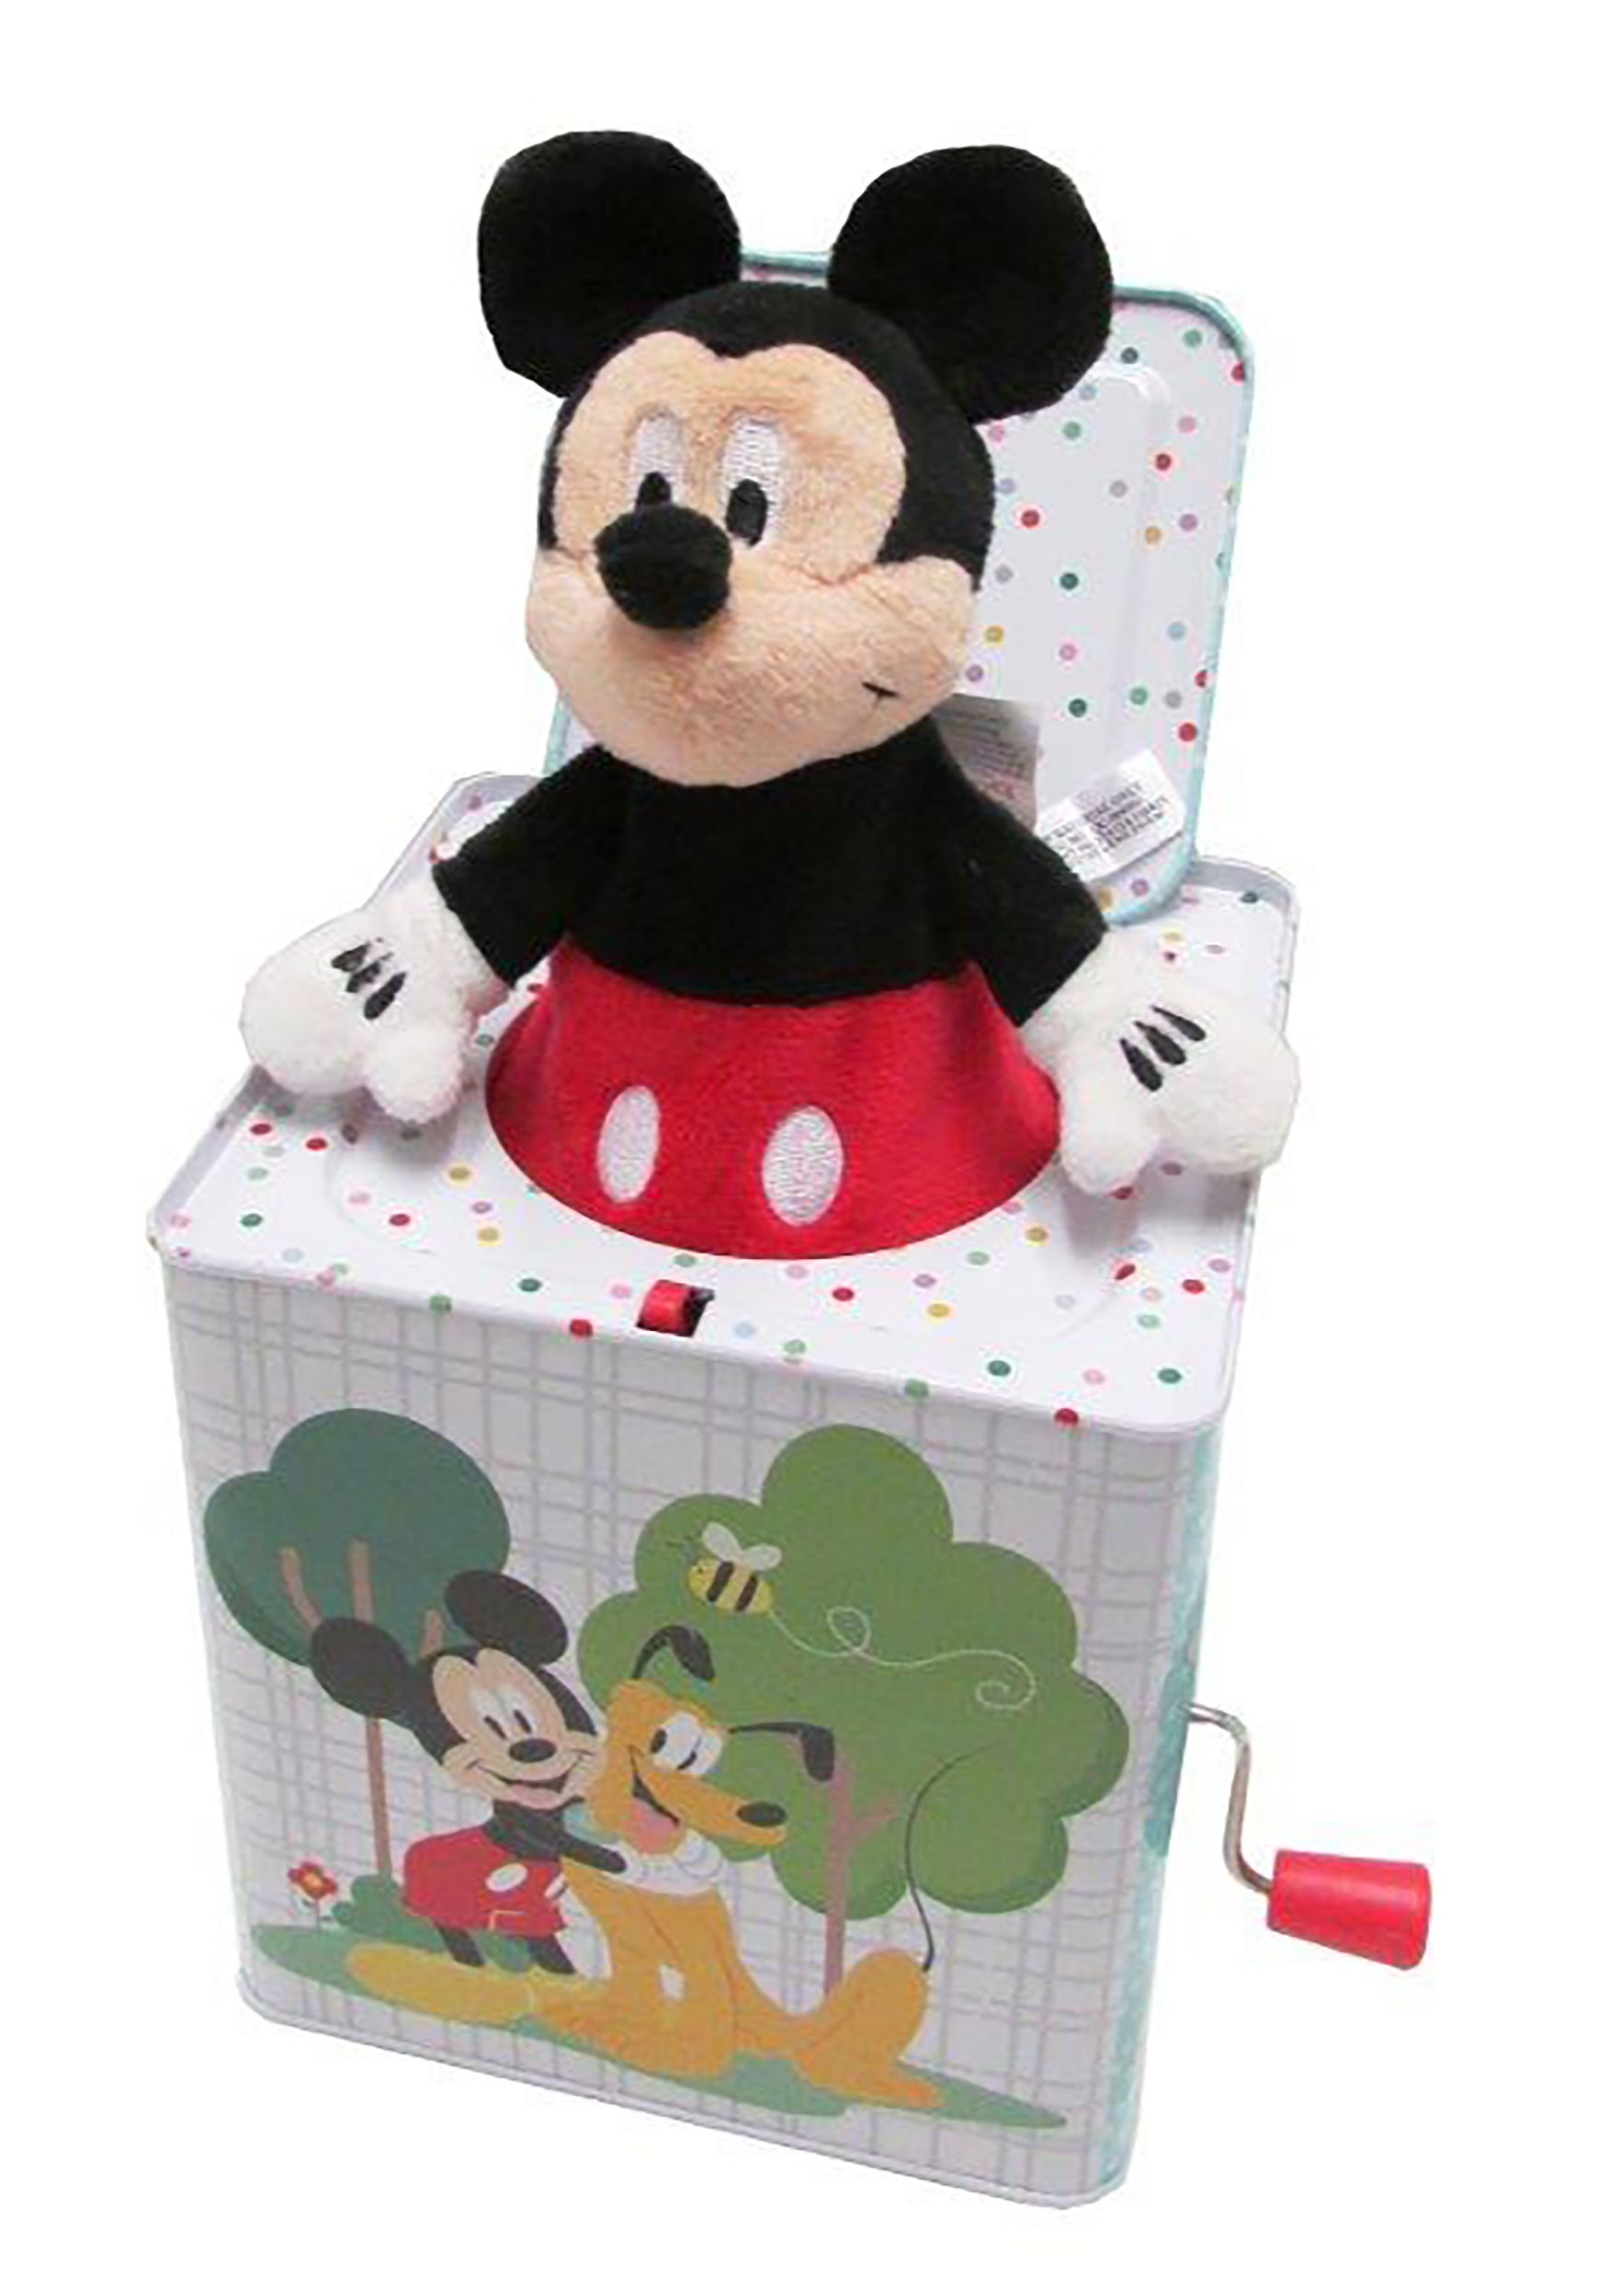 Mickey Mouse Jack-in-the-Box Toy